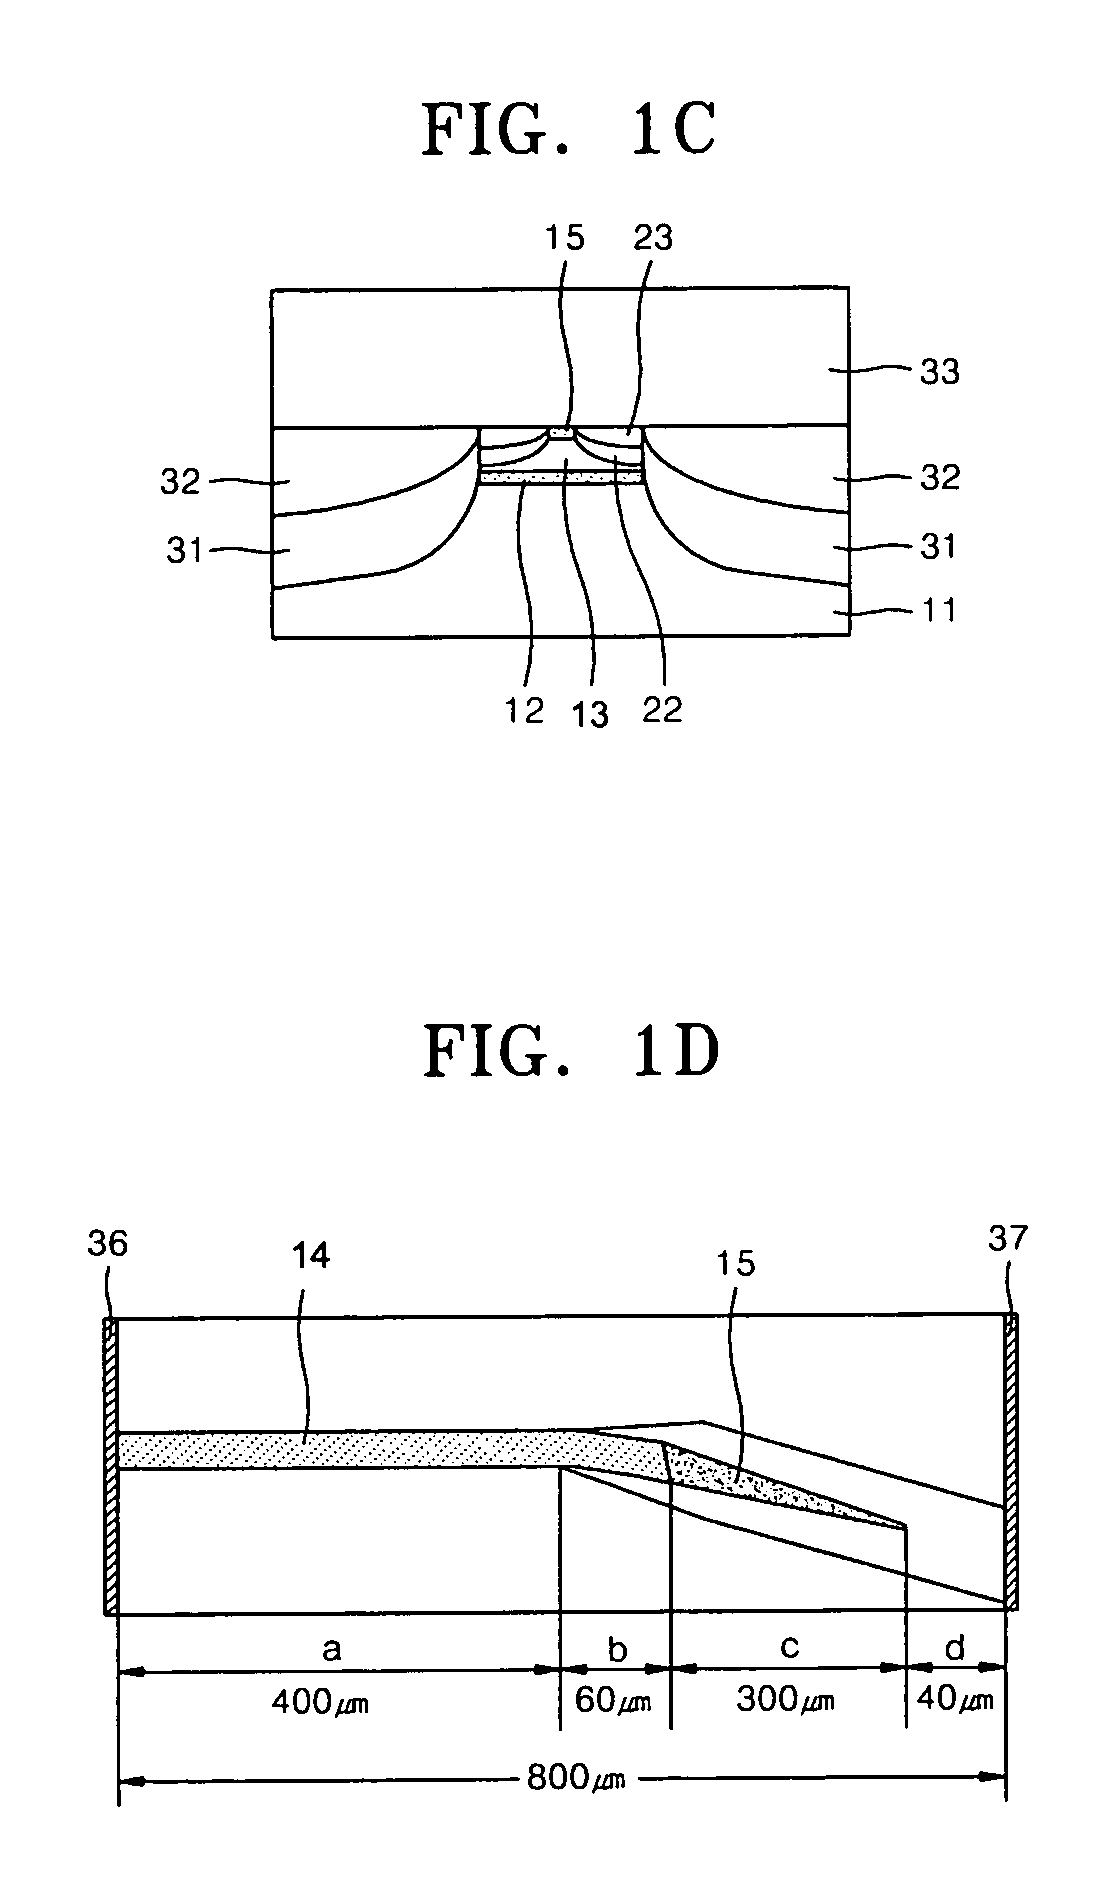 Reflective semiconductor optical amplifier (R-SOA) with dual buried heterostructure